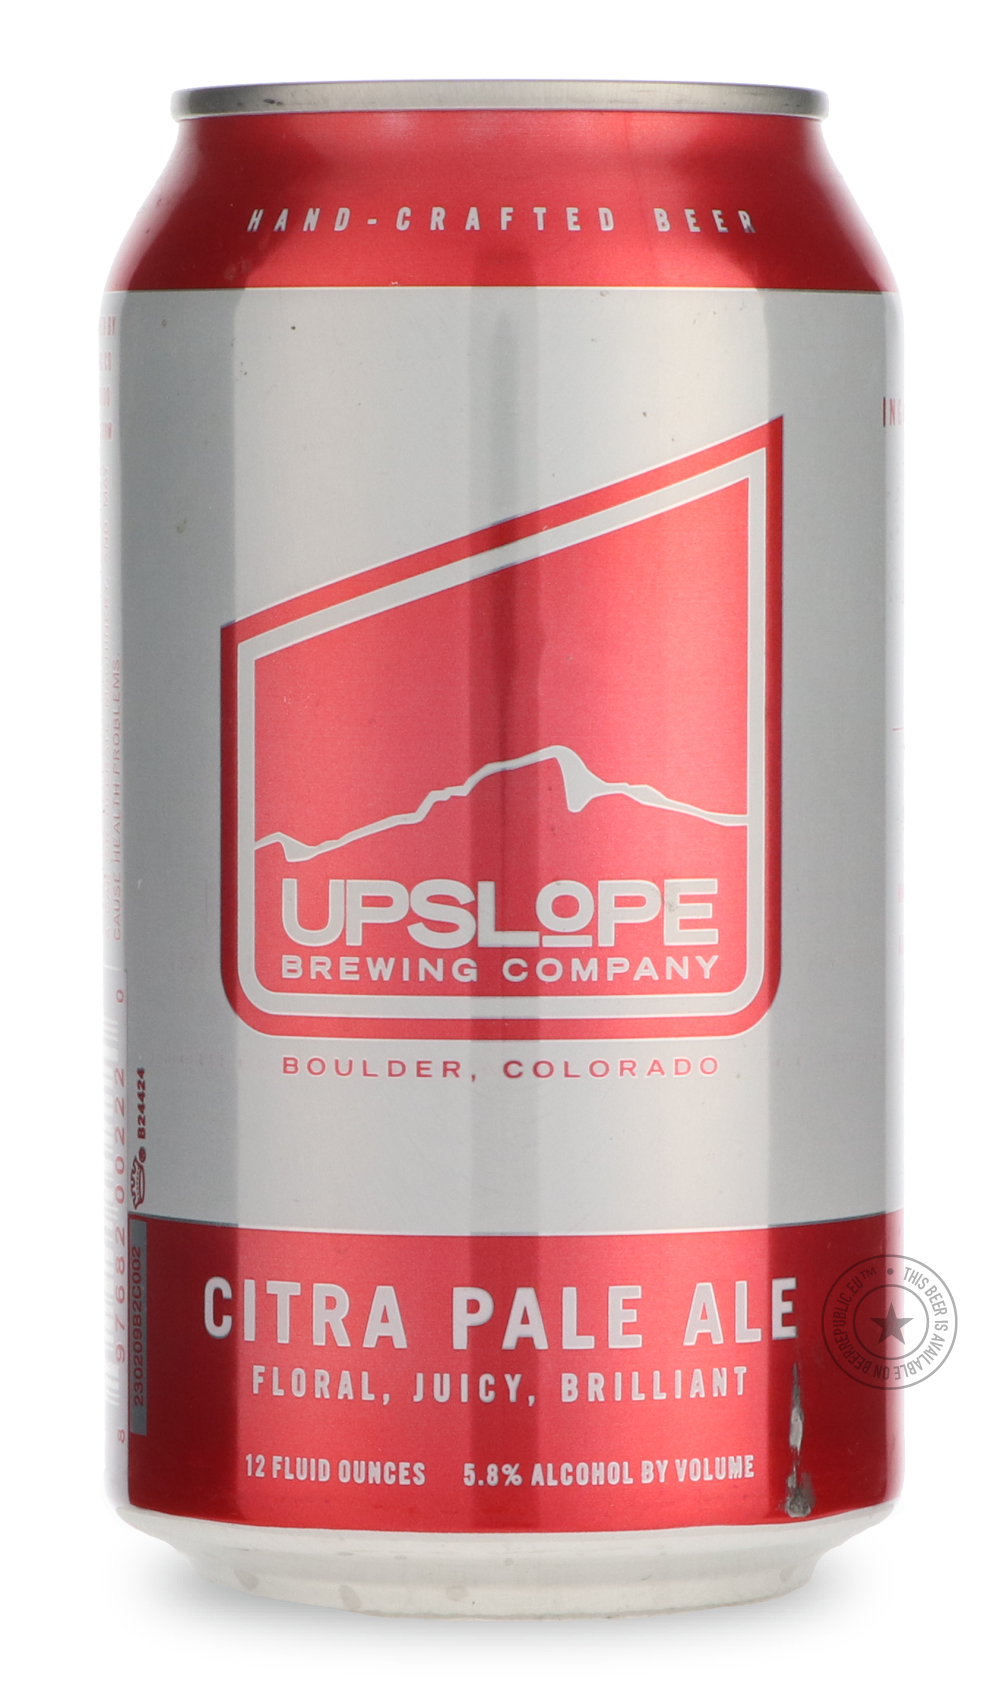 -Upslope- Citra Pale Ale-Pale- Only @ Beer Republic - The best online beer store for American & Canadian craft beer - Buy beer online from the USA and Canada - Bier online kopen - Amerikaans bier kopen - Craft beer store - Craft beer kopen - Amerikanisch bier kaufen - Bier online kaufen - Acheter biere online - IPA - Stout - Porter - New England IPA - Hazy IPA - Imperial Stout - Barrel Aged - Barrel Aged Imperial Stout - Brown - Dark beer - Blond - Blonde - Pilsner - Lager - Wheat - Weizen - Amber - Barley 